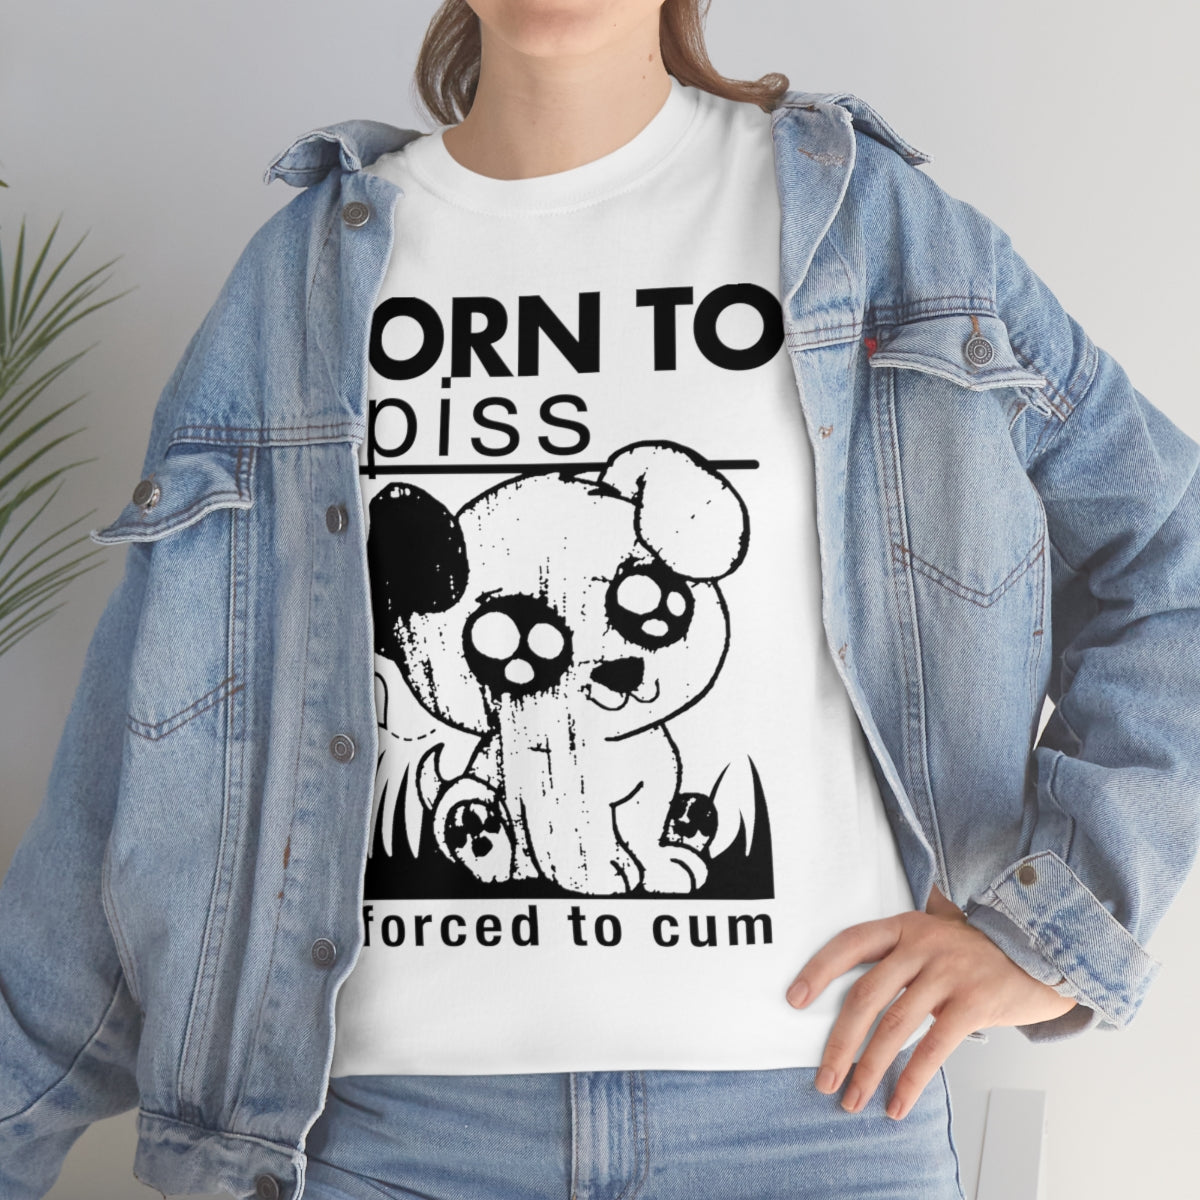 Born To Piss, Forced To Cum.